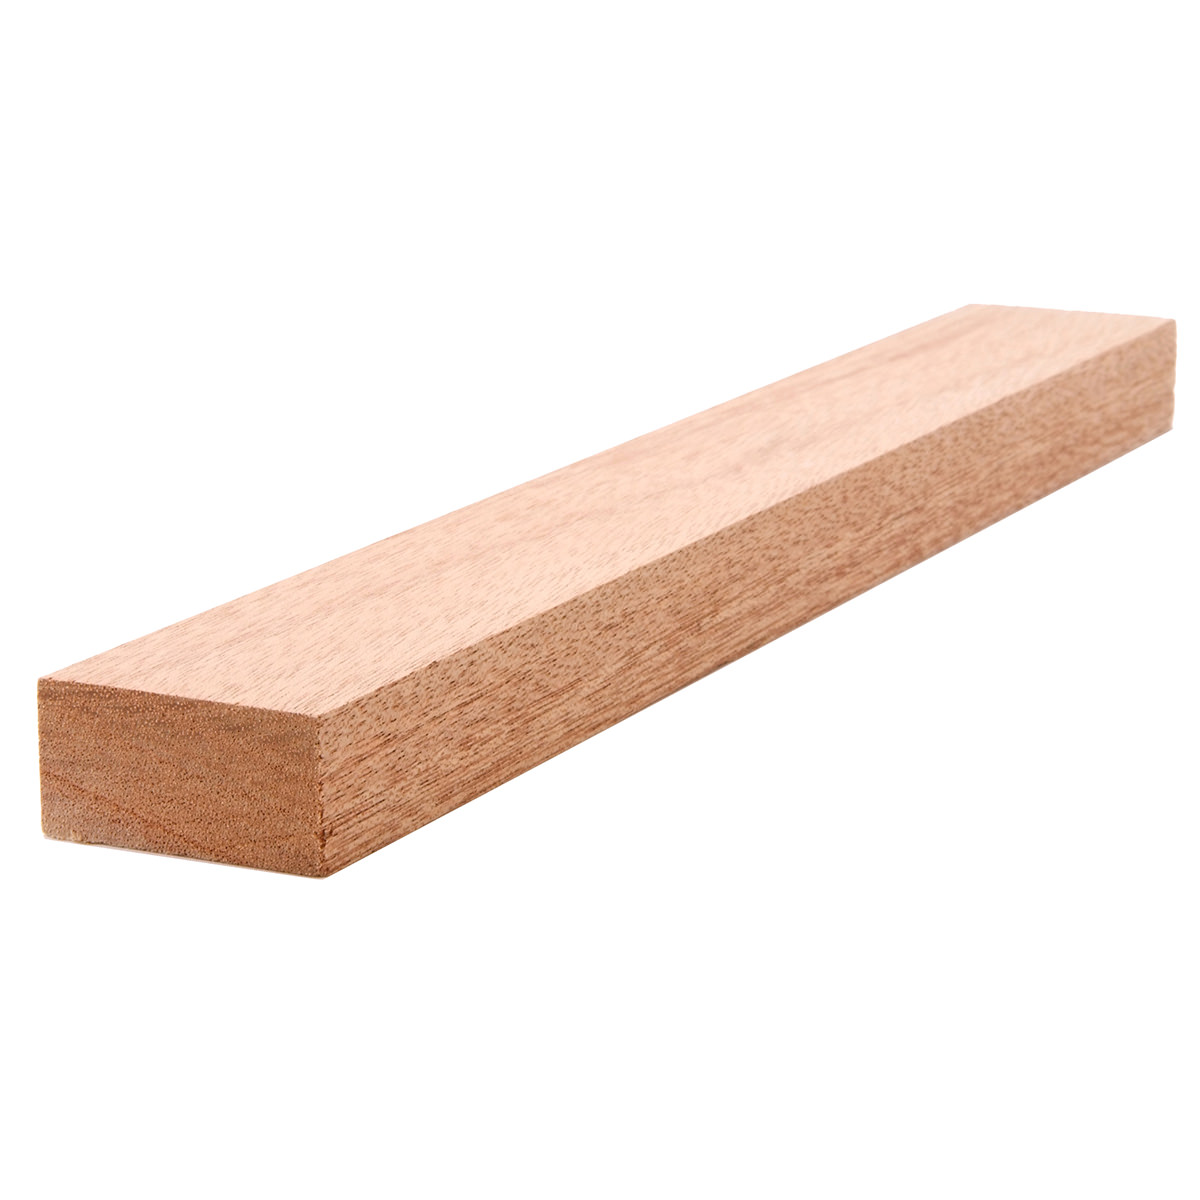 Chechen boards lumber 1/2 or 3/4  surface 4 sides 36" 